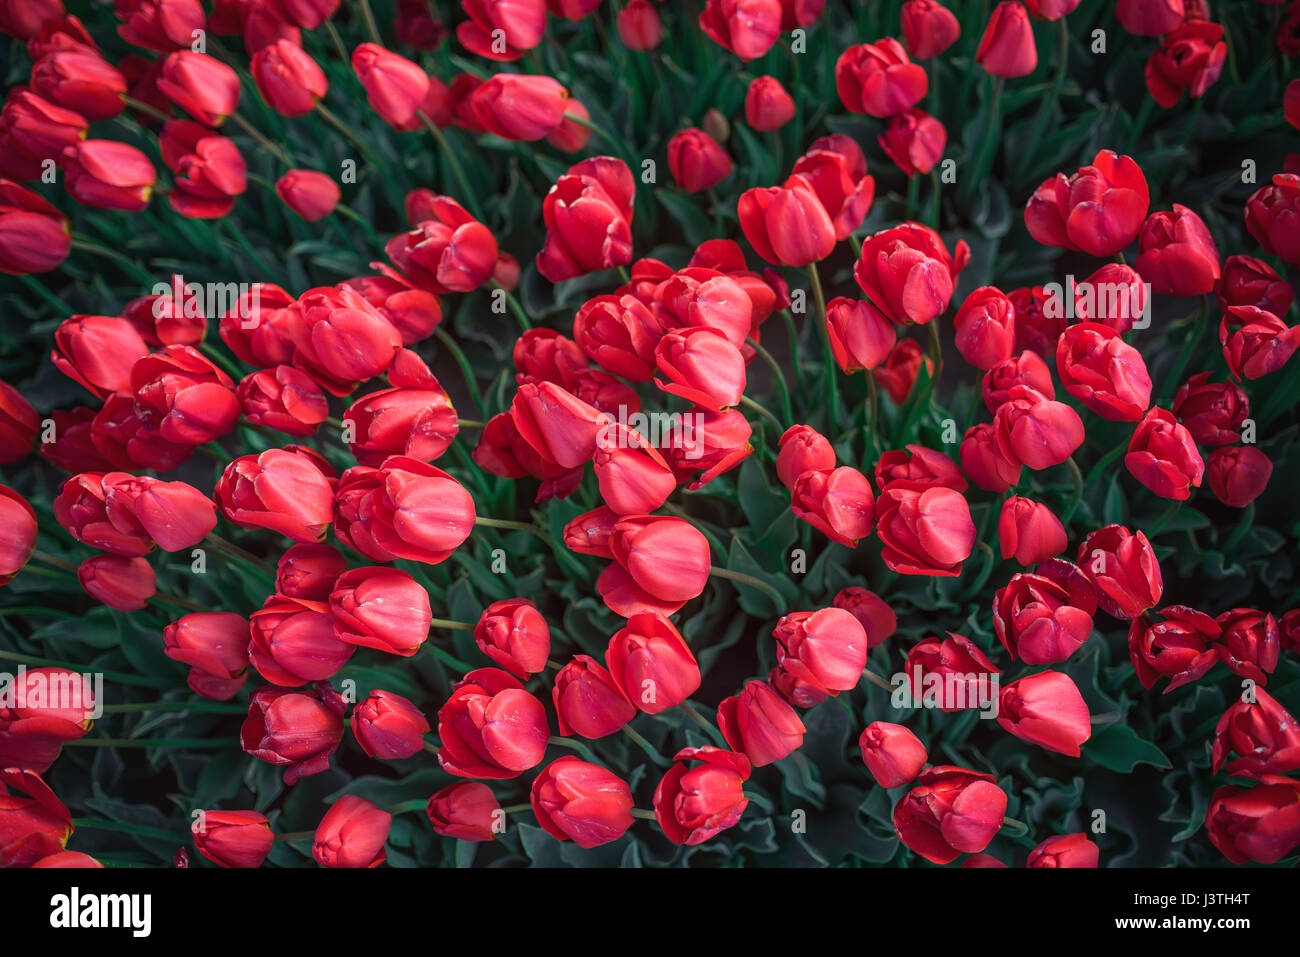 A bright red tulip flower background with a fade to white on the top for text. Use it for a spring or love concept. Stock Photo